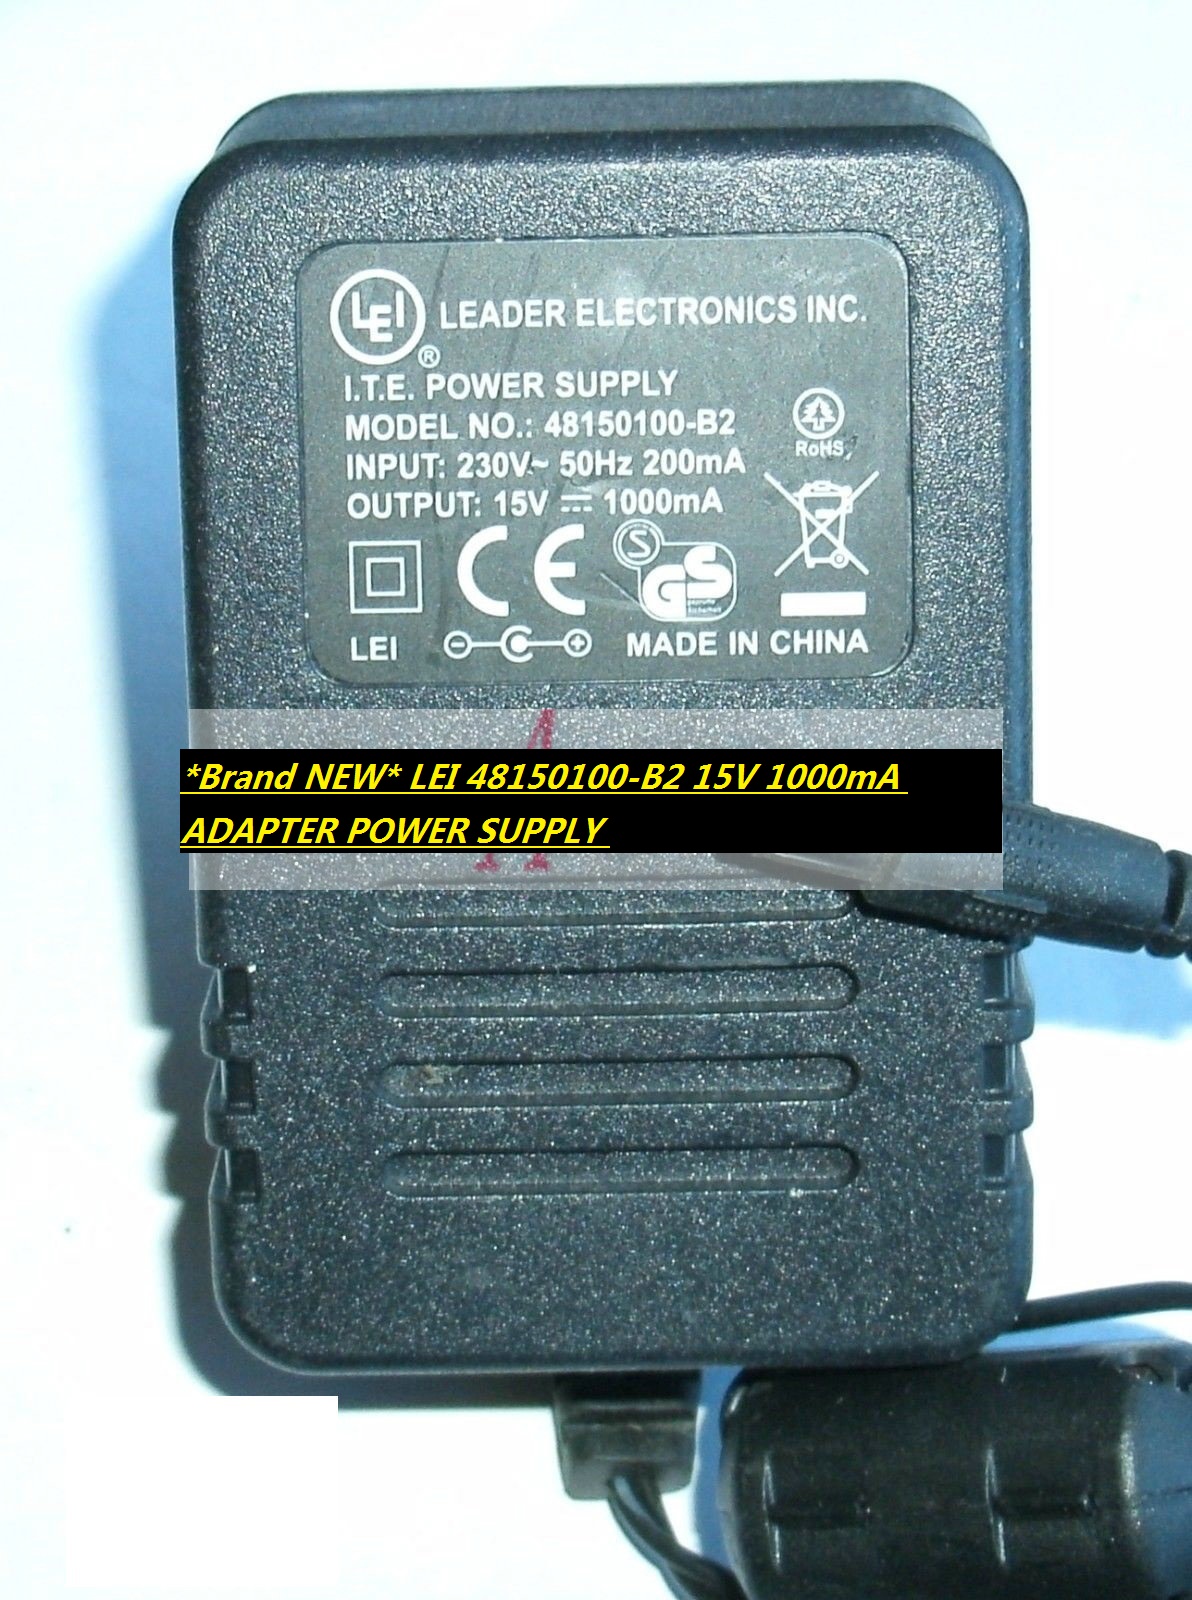 *Brand NEW* LEI 48150100-B2 15V 1000mA ADAPTER POWER SUPPLY - Click Image to Close